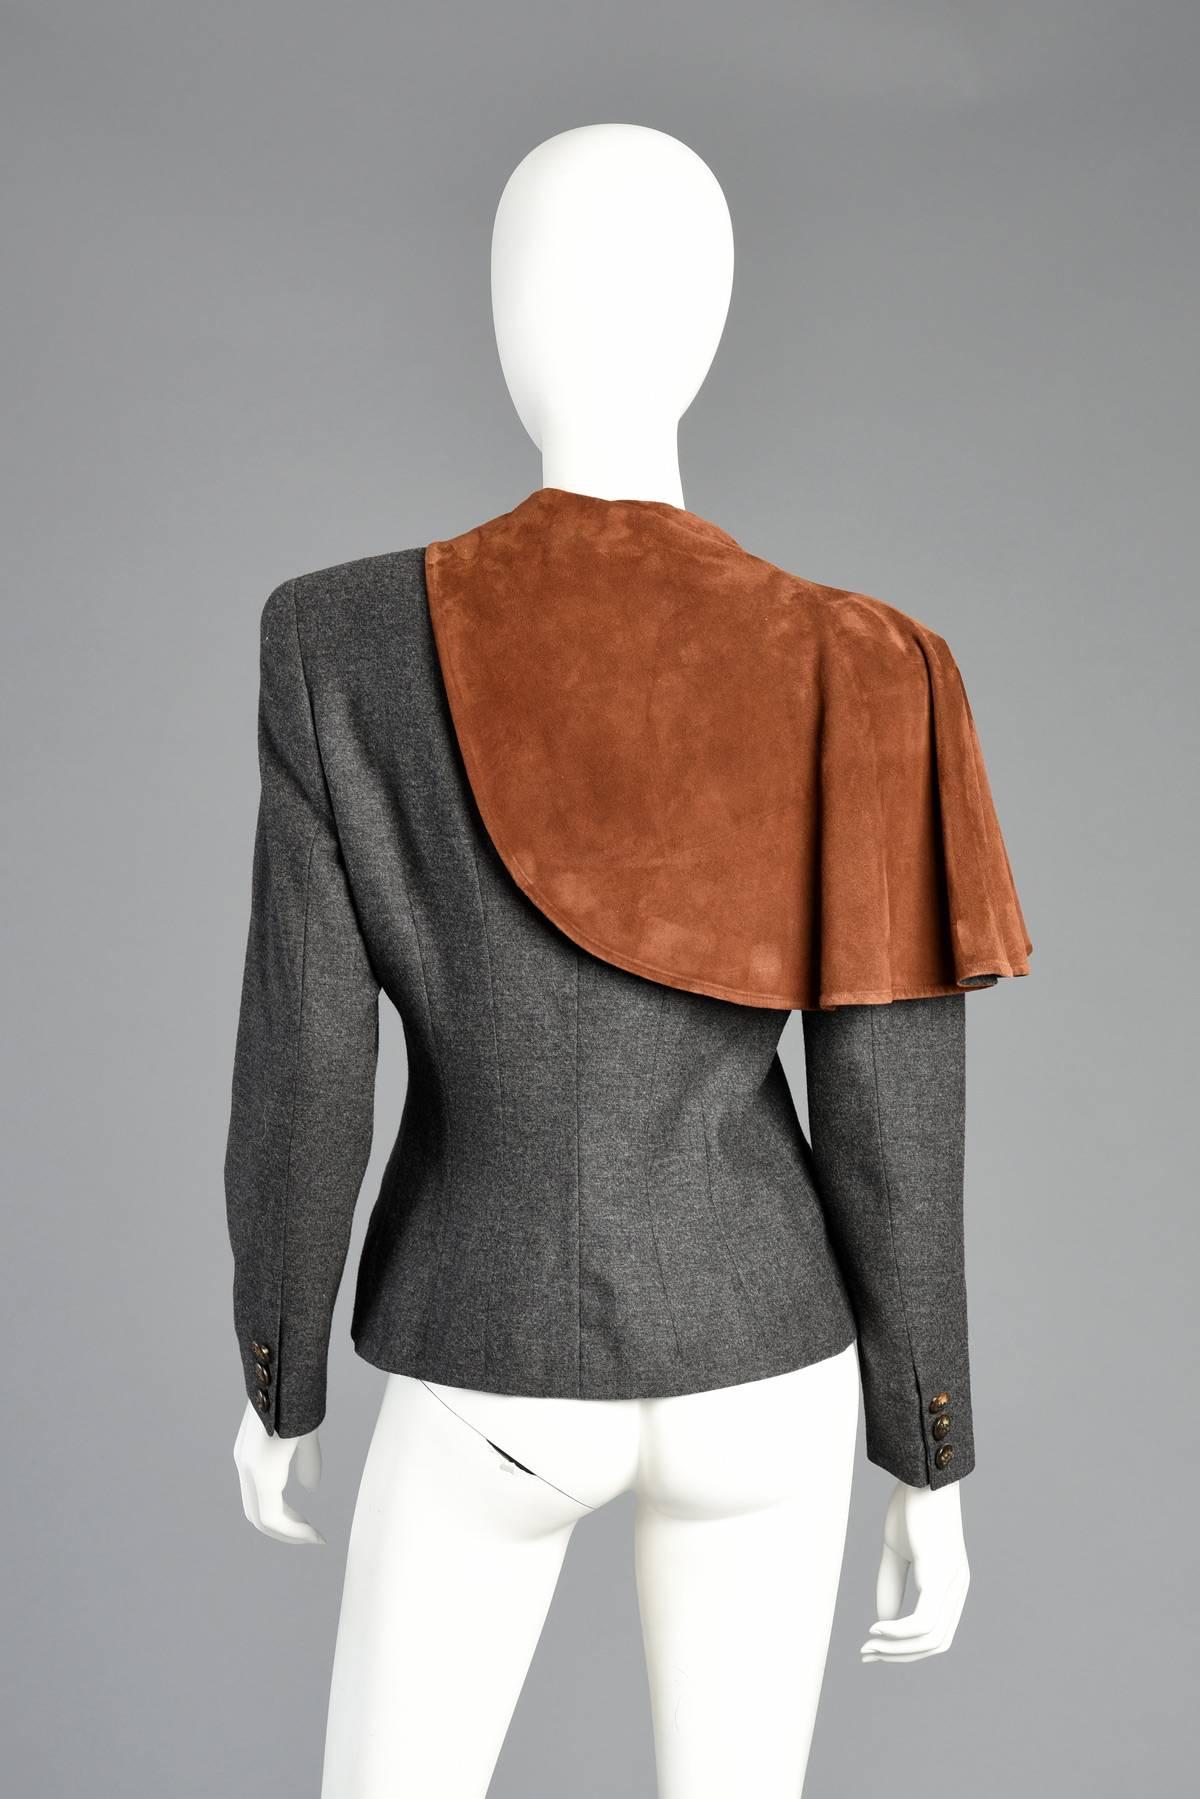 Incredible Gucci Charcoal Wool + Suede Avant Garde Blazer Jacket For Sale 4